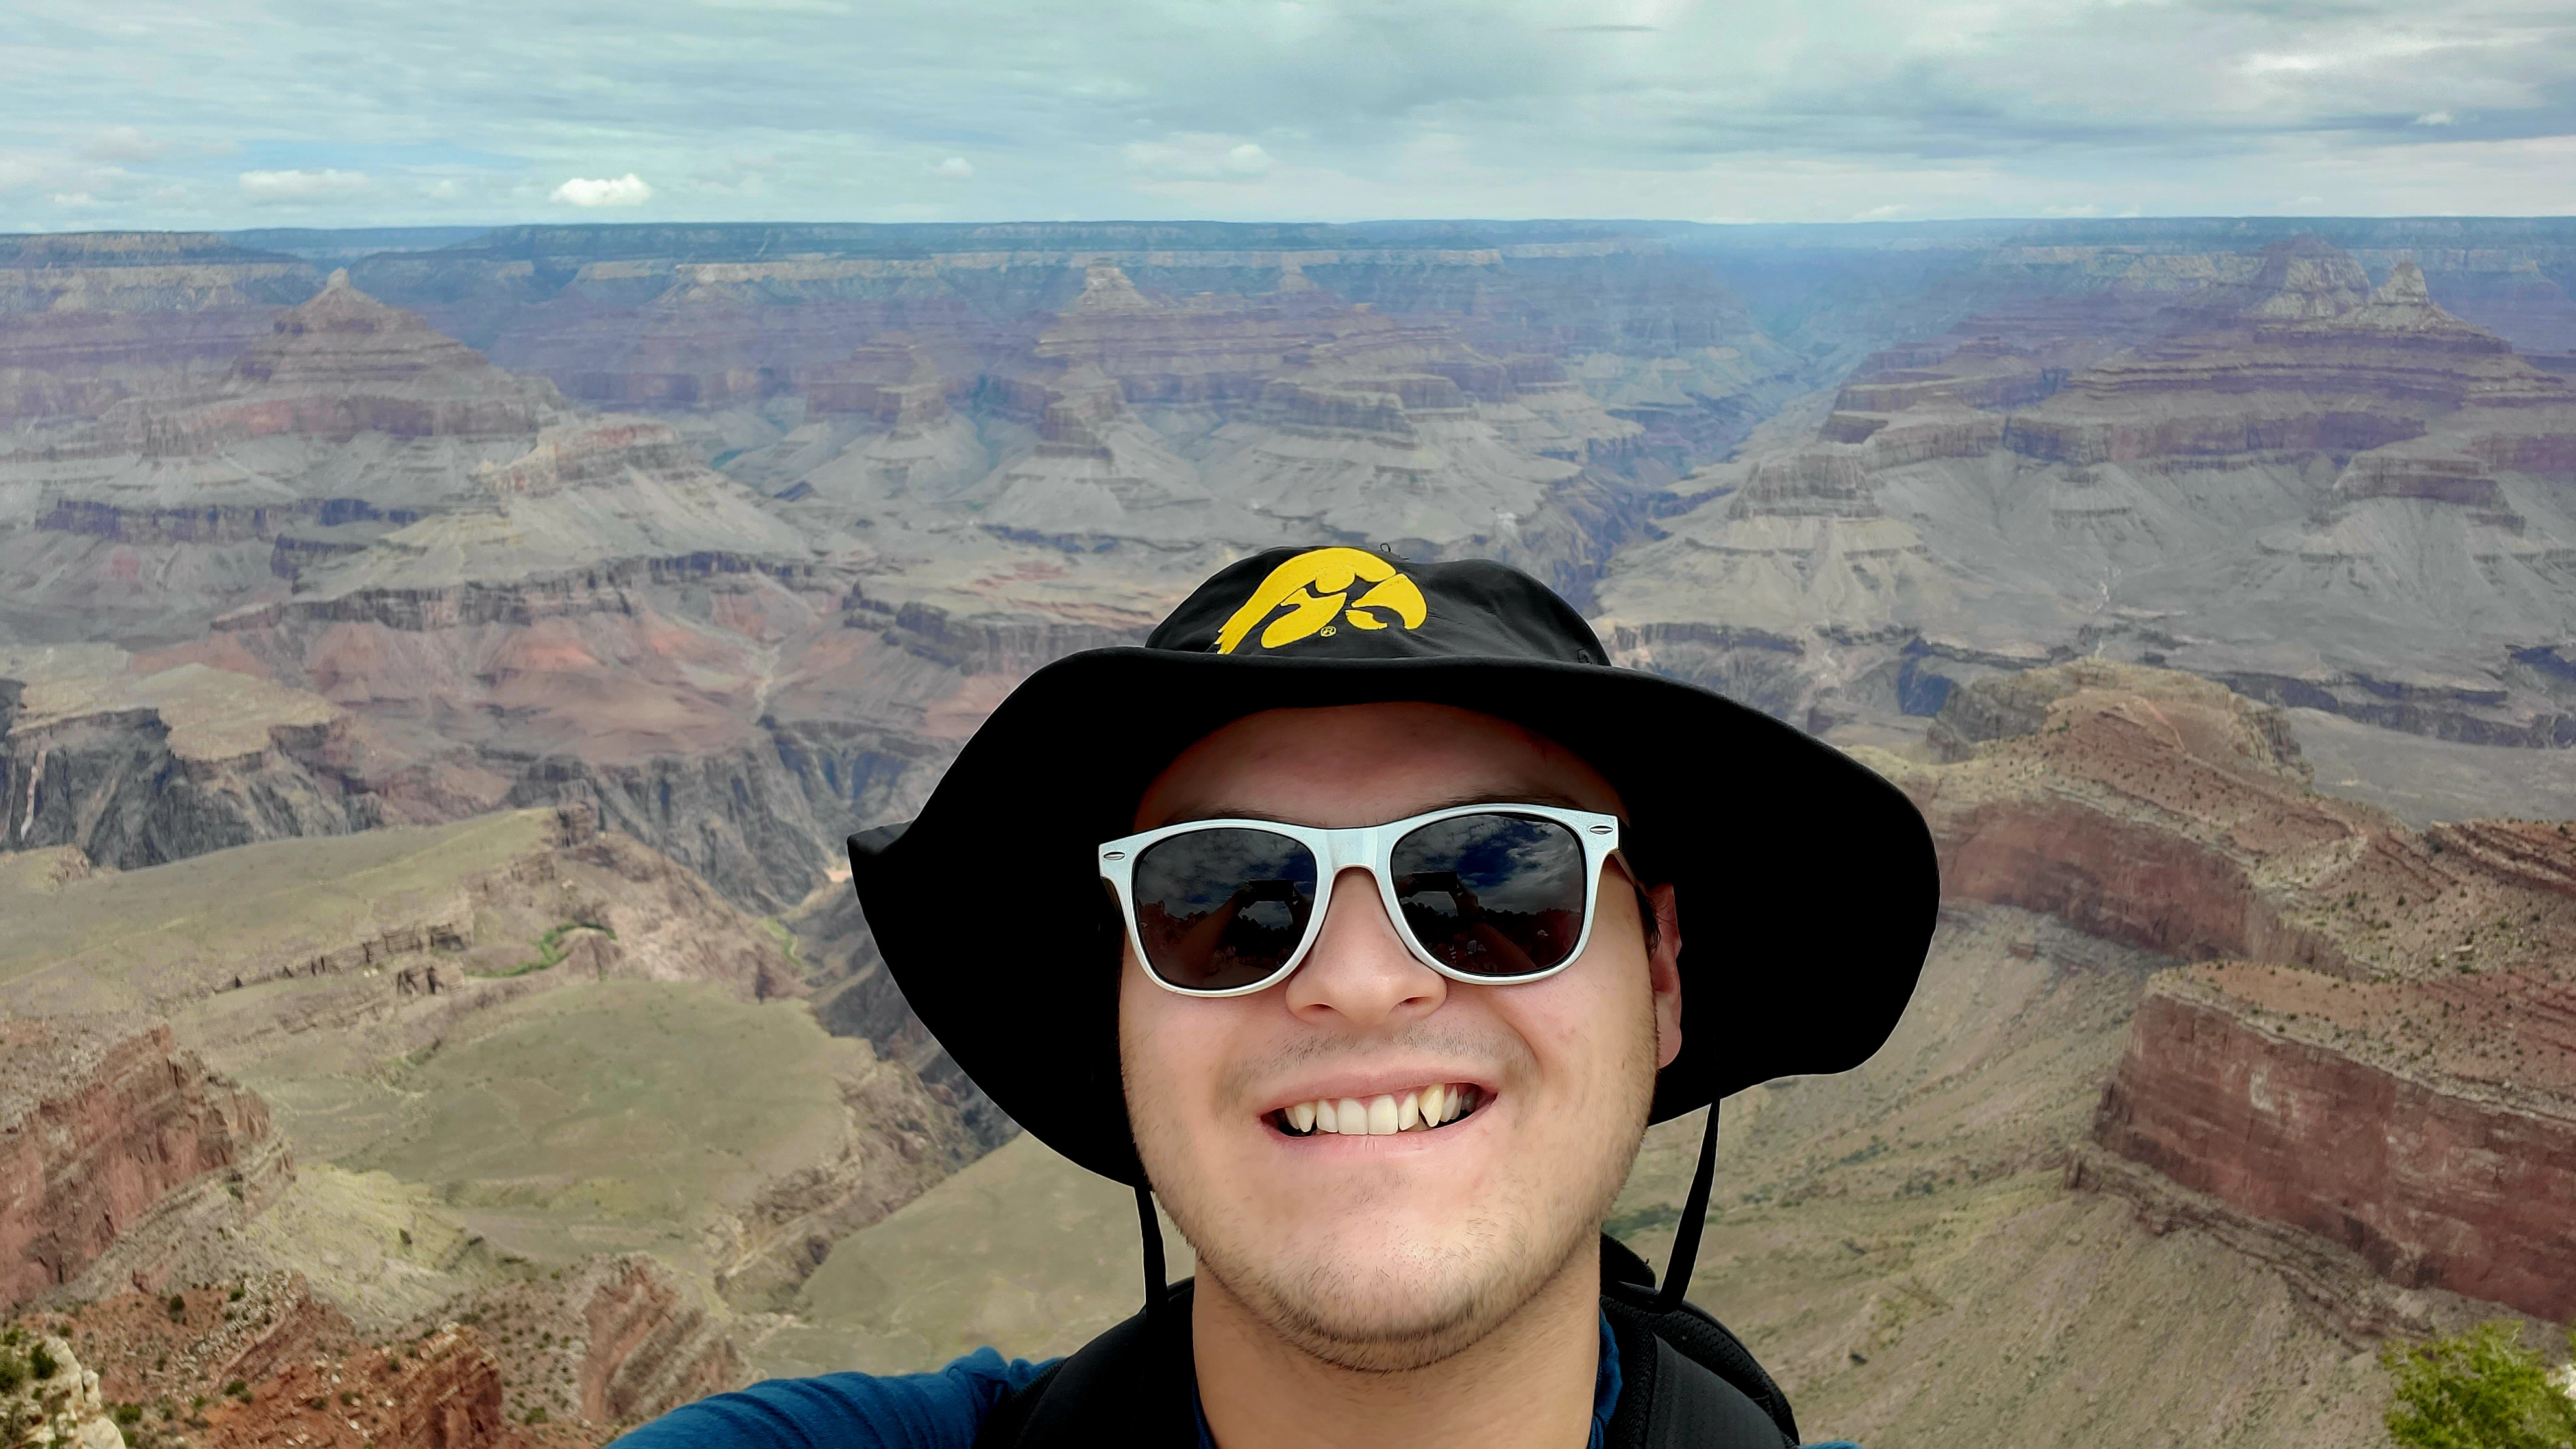 Selfie of Travis Fischer with a mountainous landscape in the background. He is wearing sunglasses and an Iowa Hawkeyes hat.